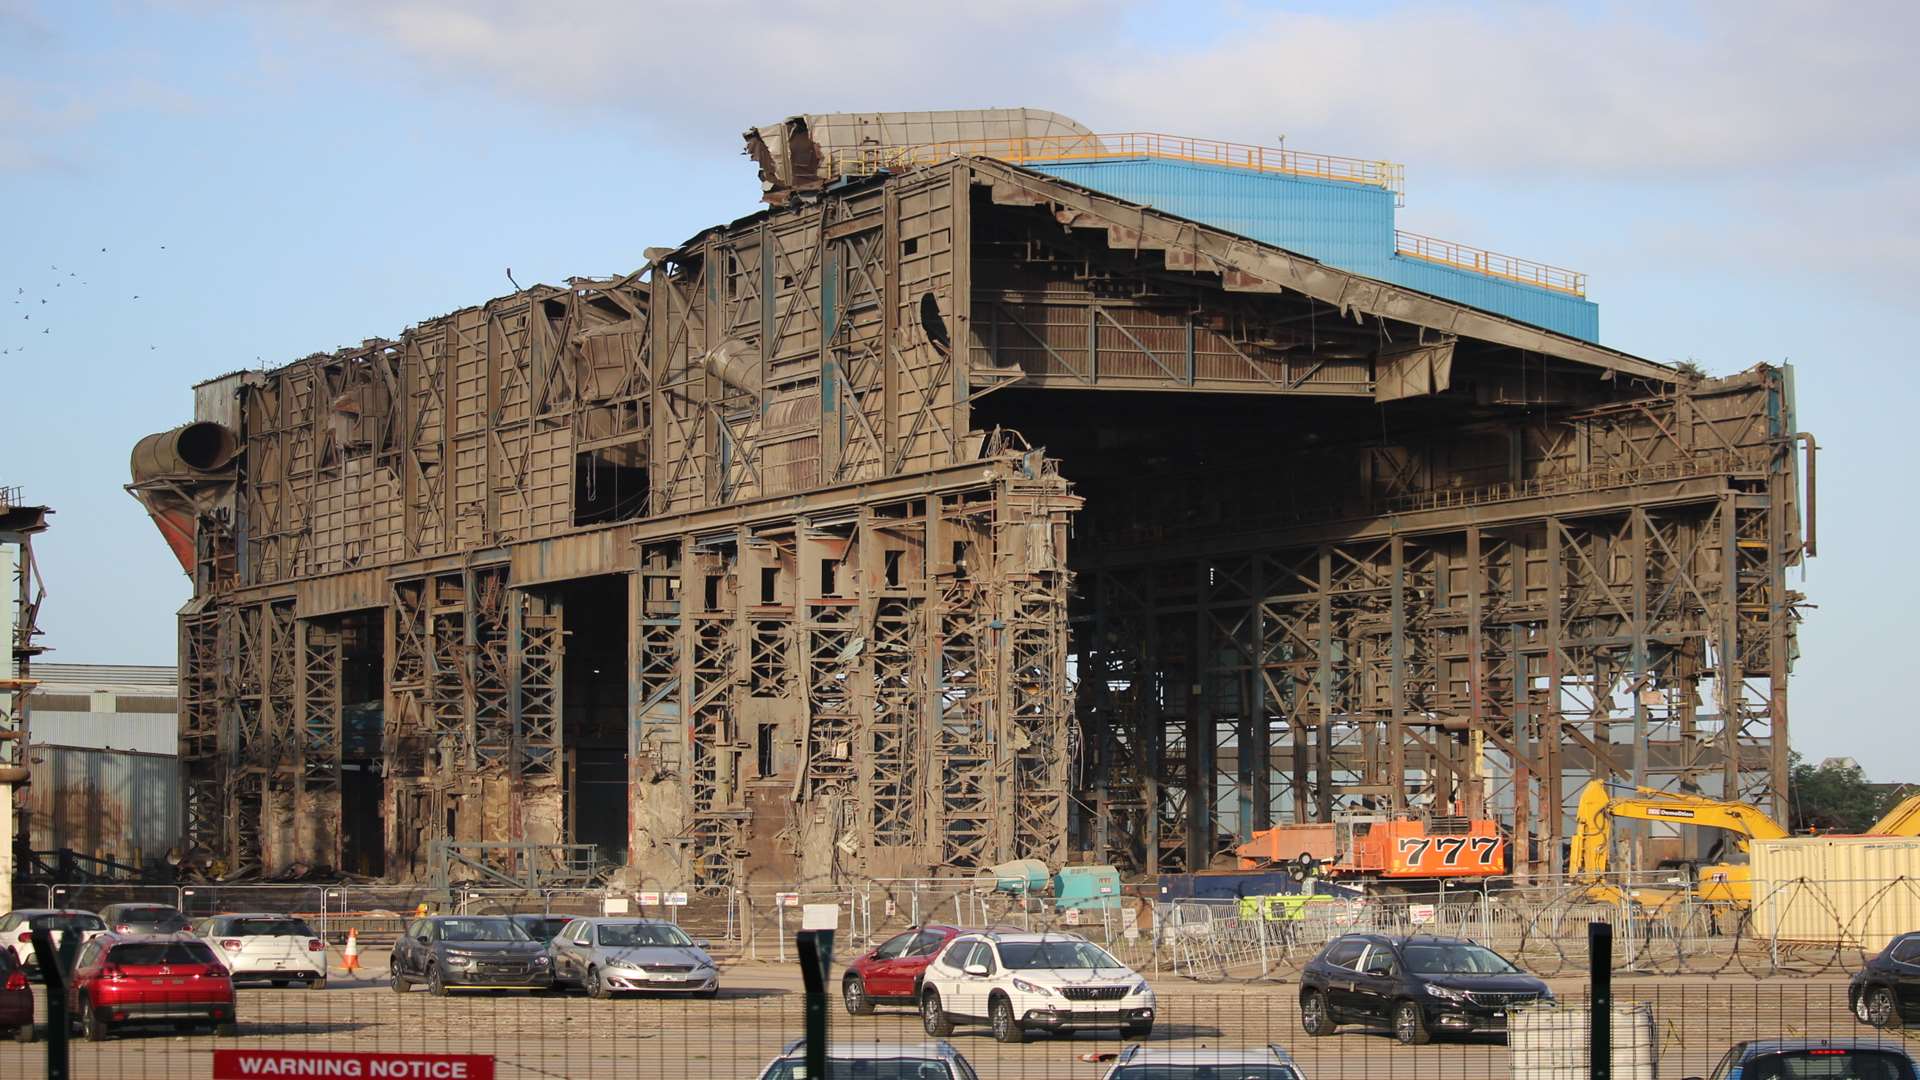 Part of the huge demolition process of the former Sheerness steel plant.